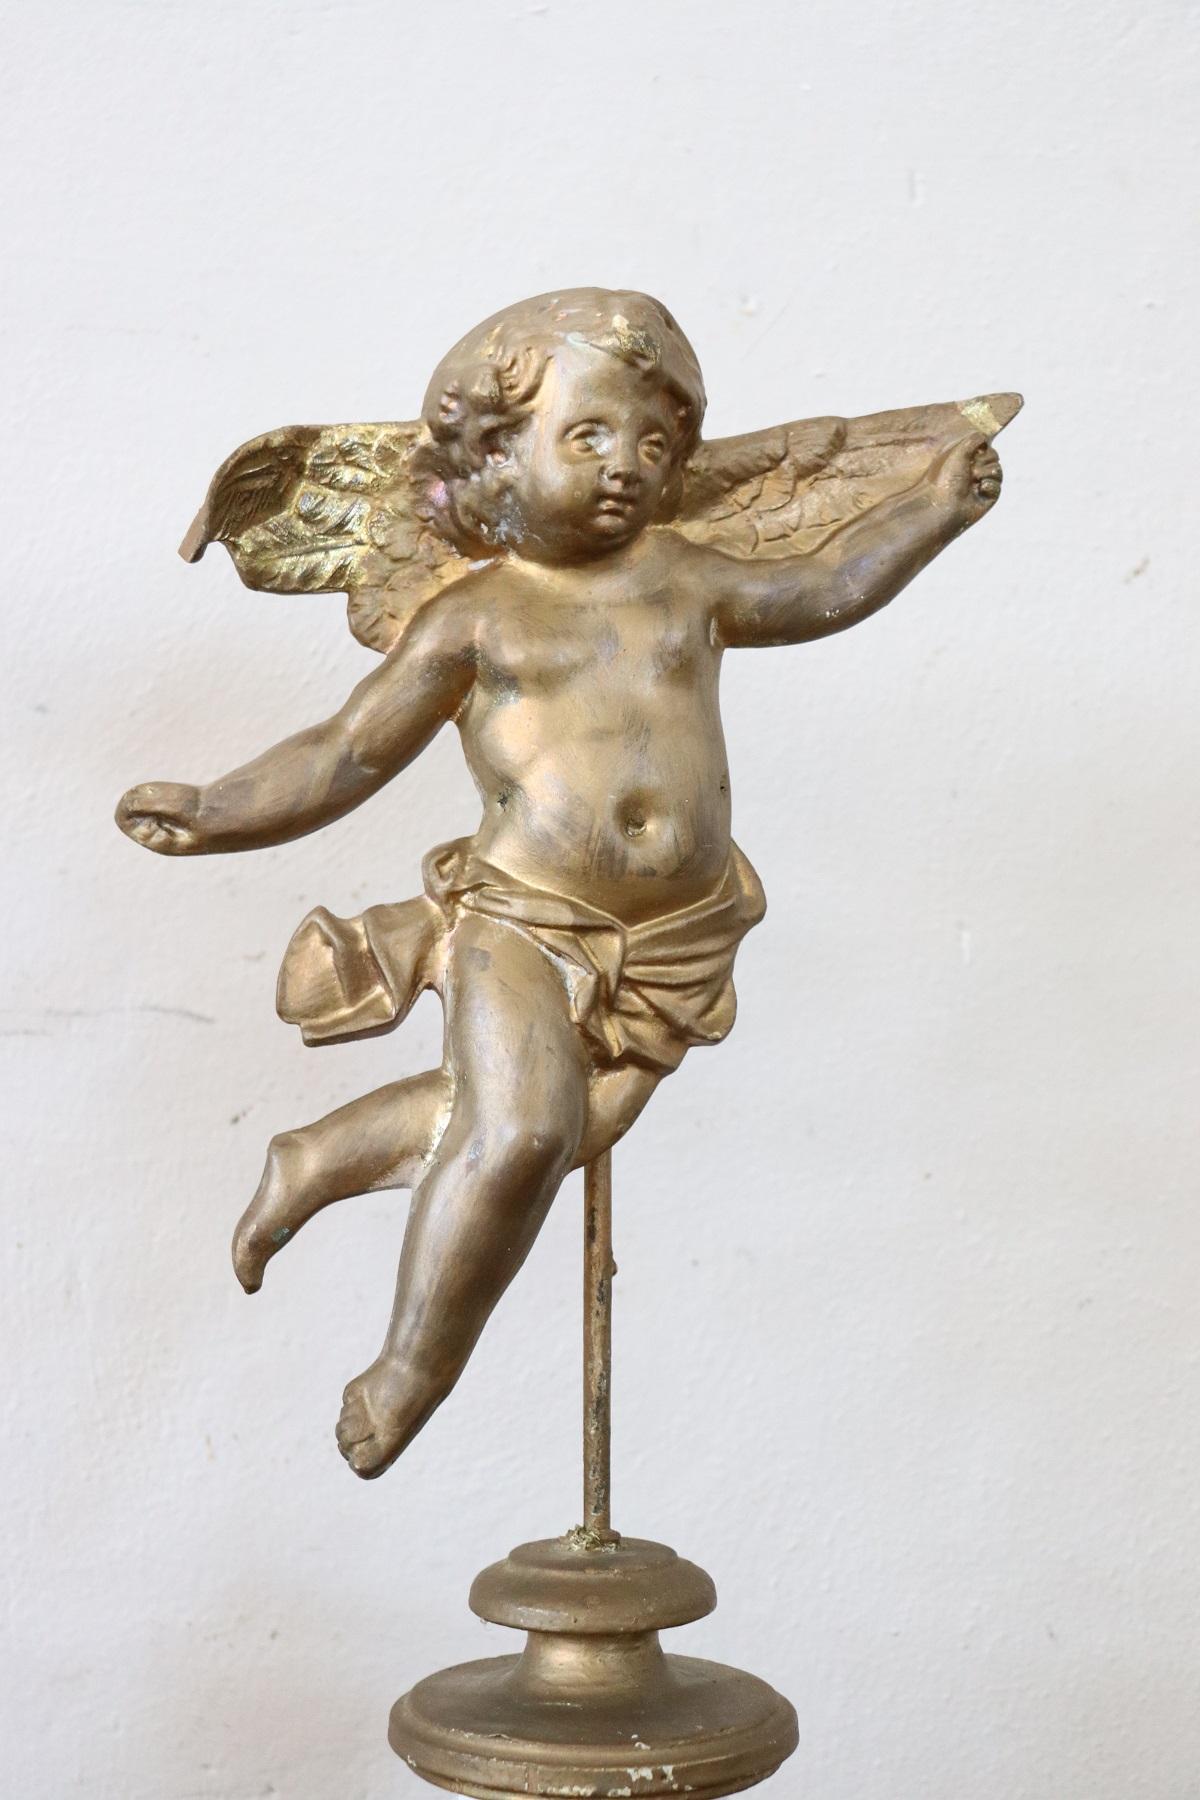 Gilt 19th Century Italian Pair of Gilded Bronze Angels on a Wooden Base